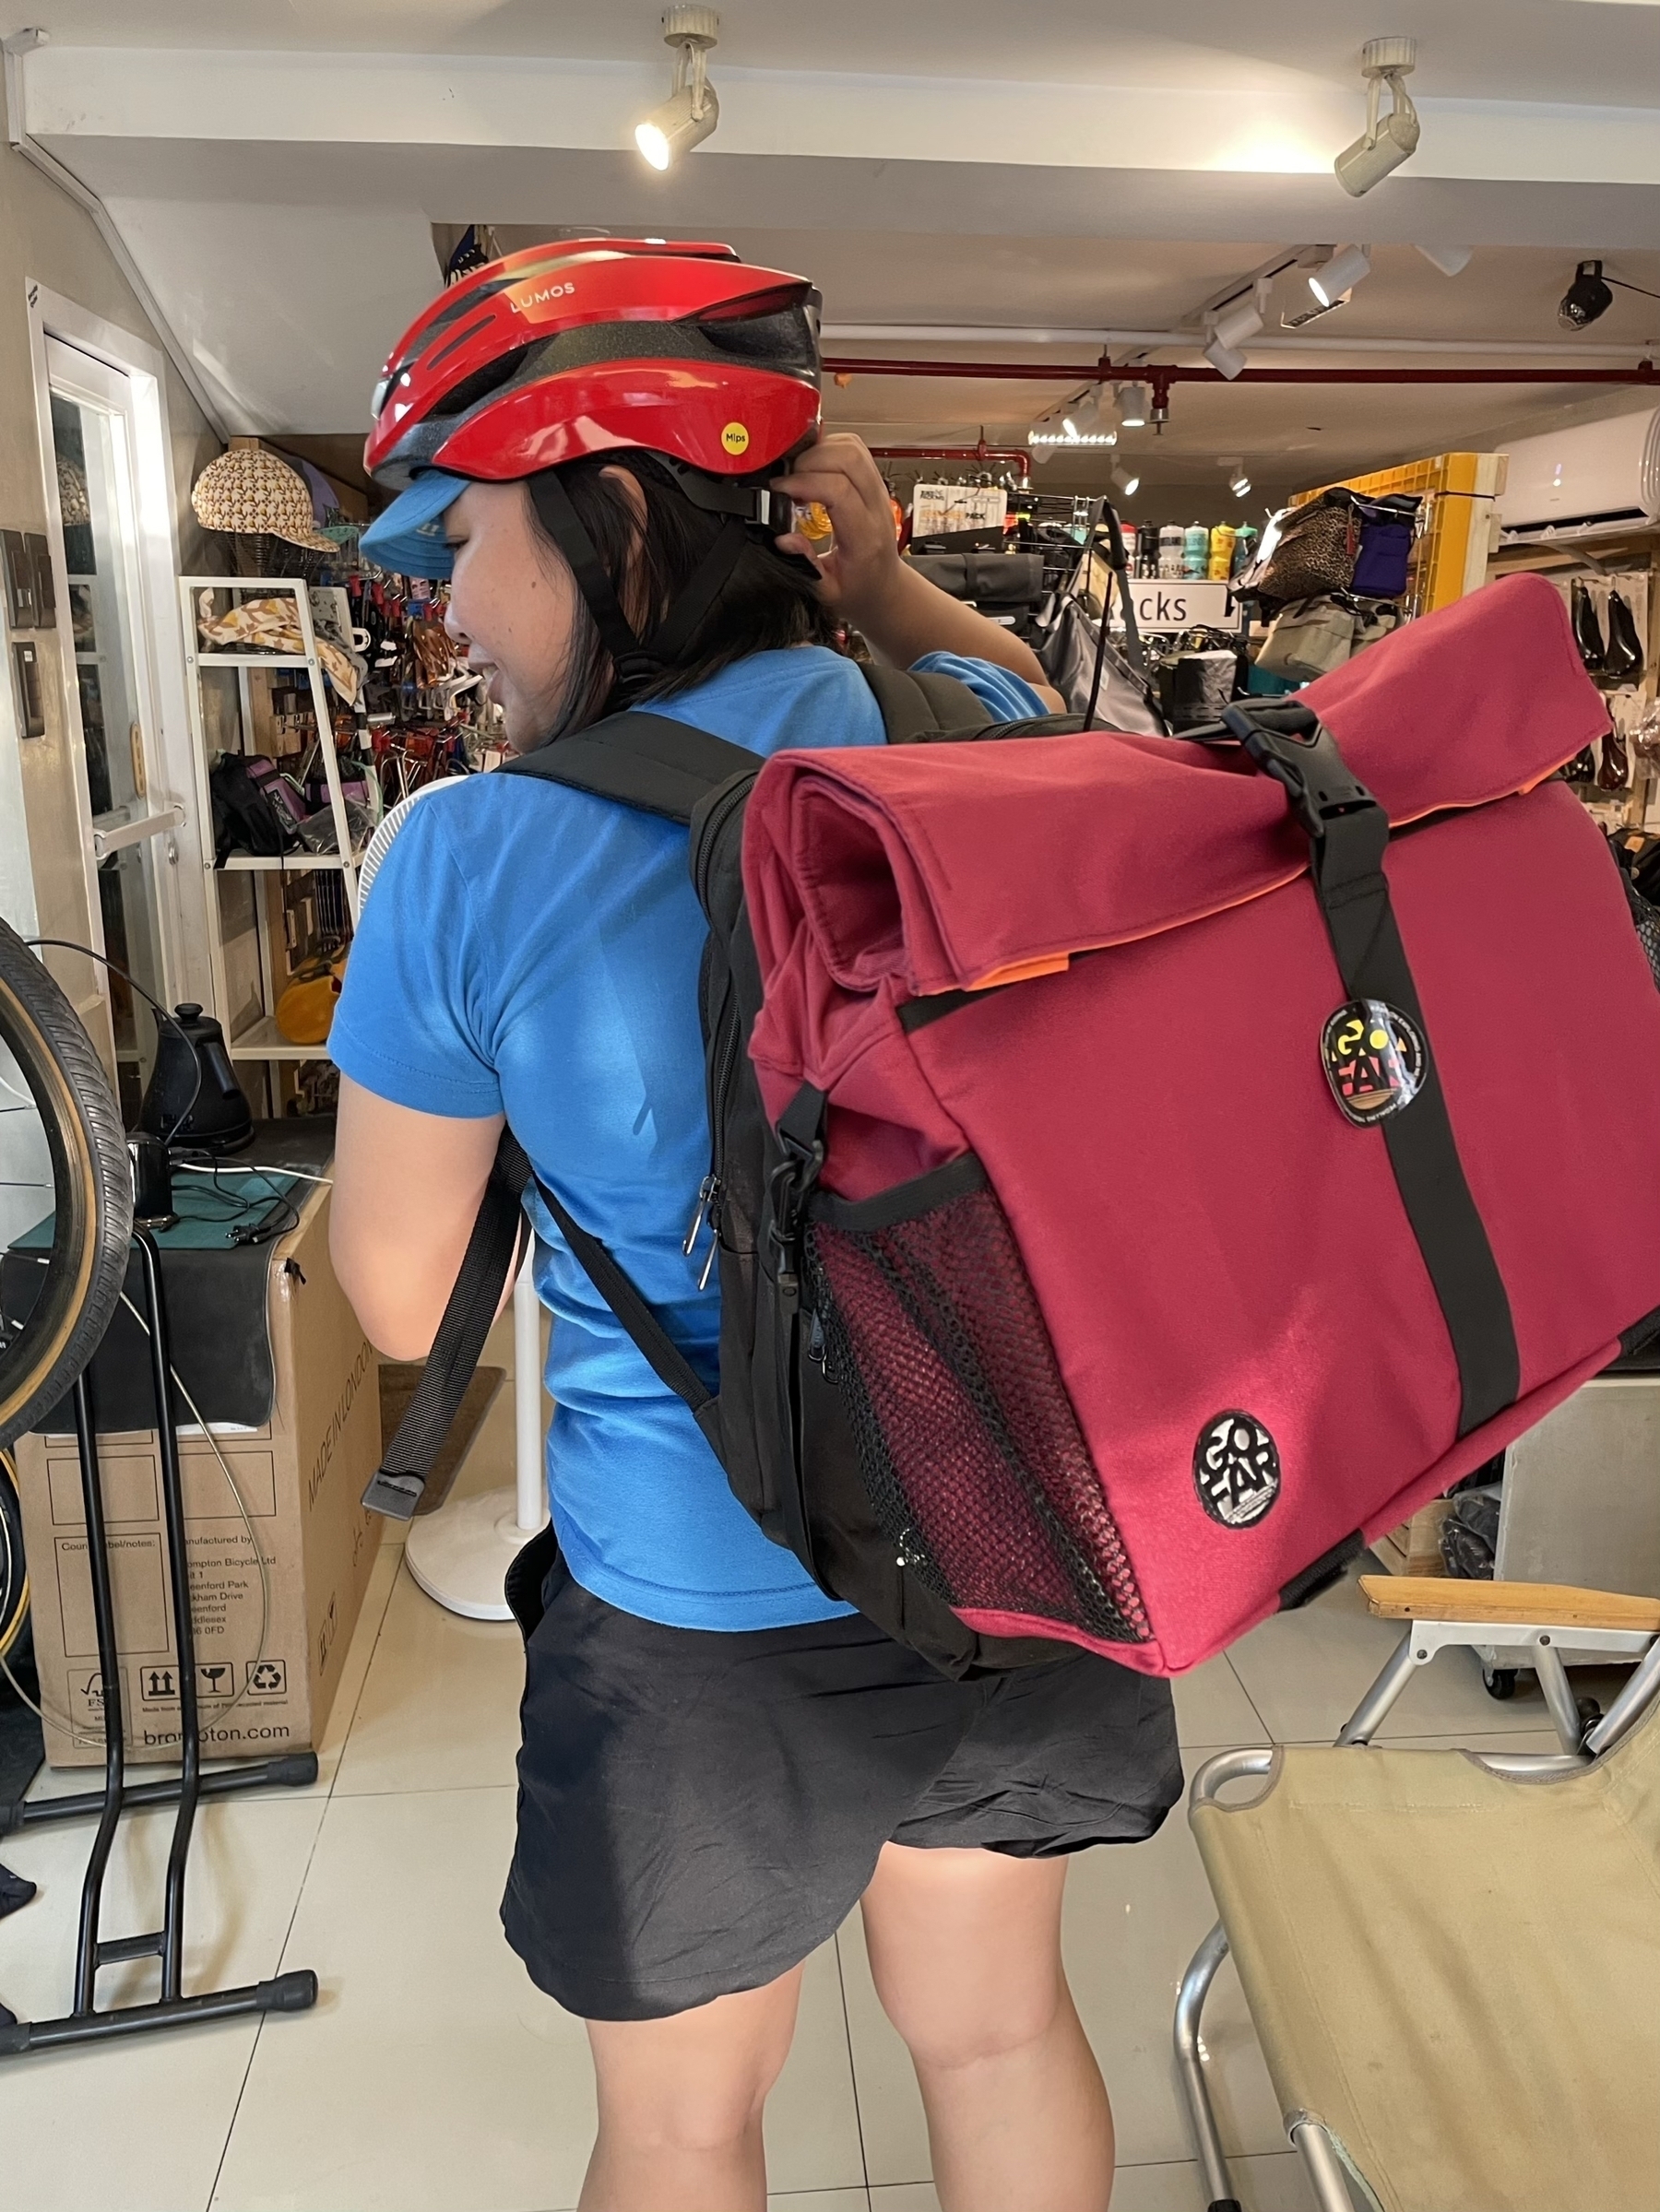 photo of Chi with her backpack on, and her new front bag, meant for a trifold folding bike with a front carrier block, attached to the front of her backpack.